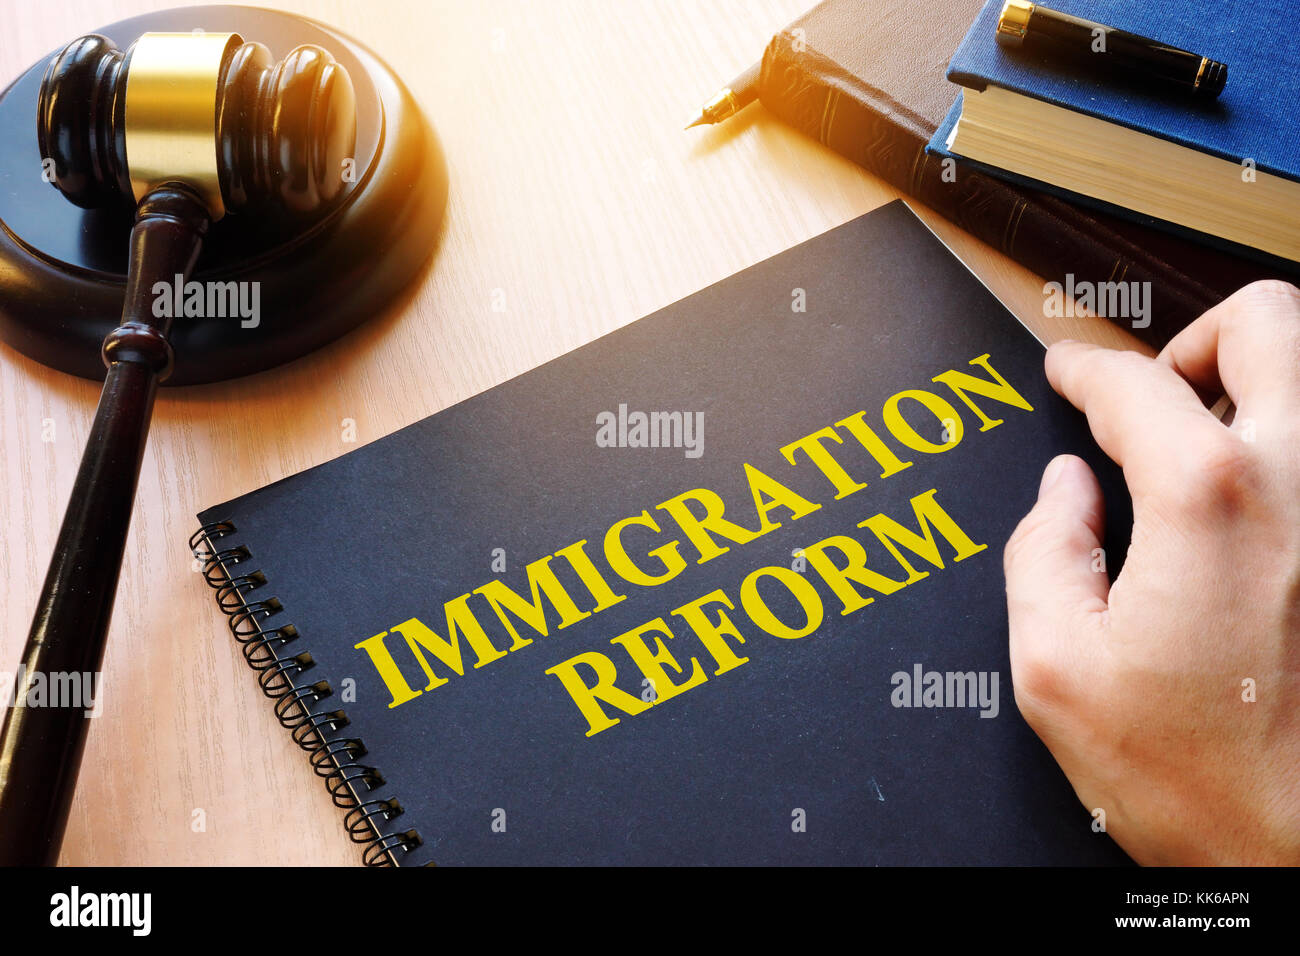 Immigration reform and gavel on a desk. Stock Photo